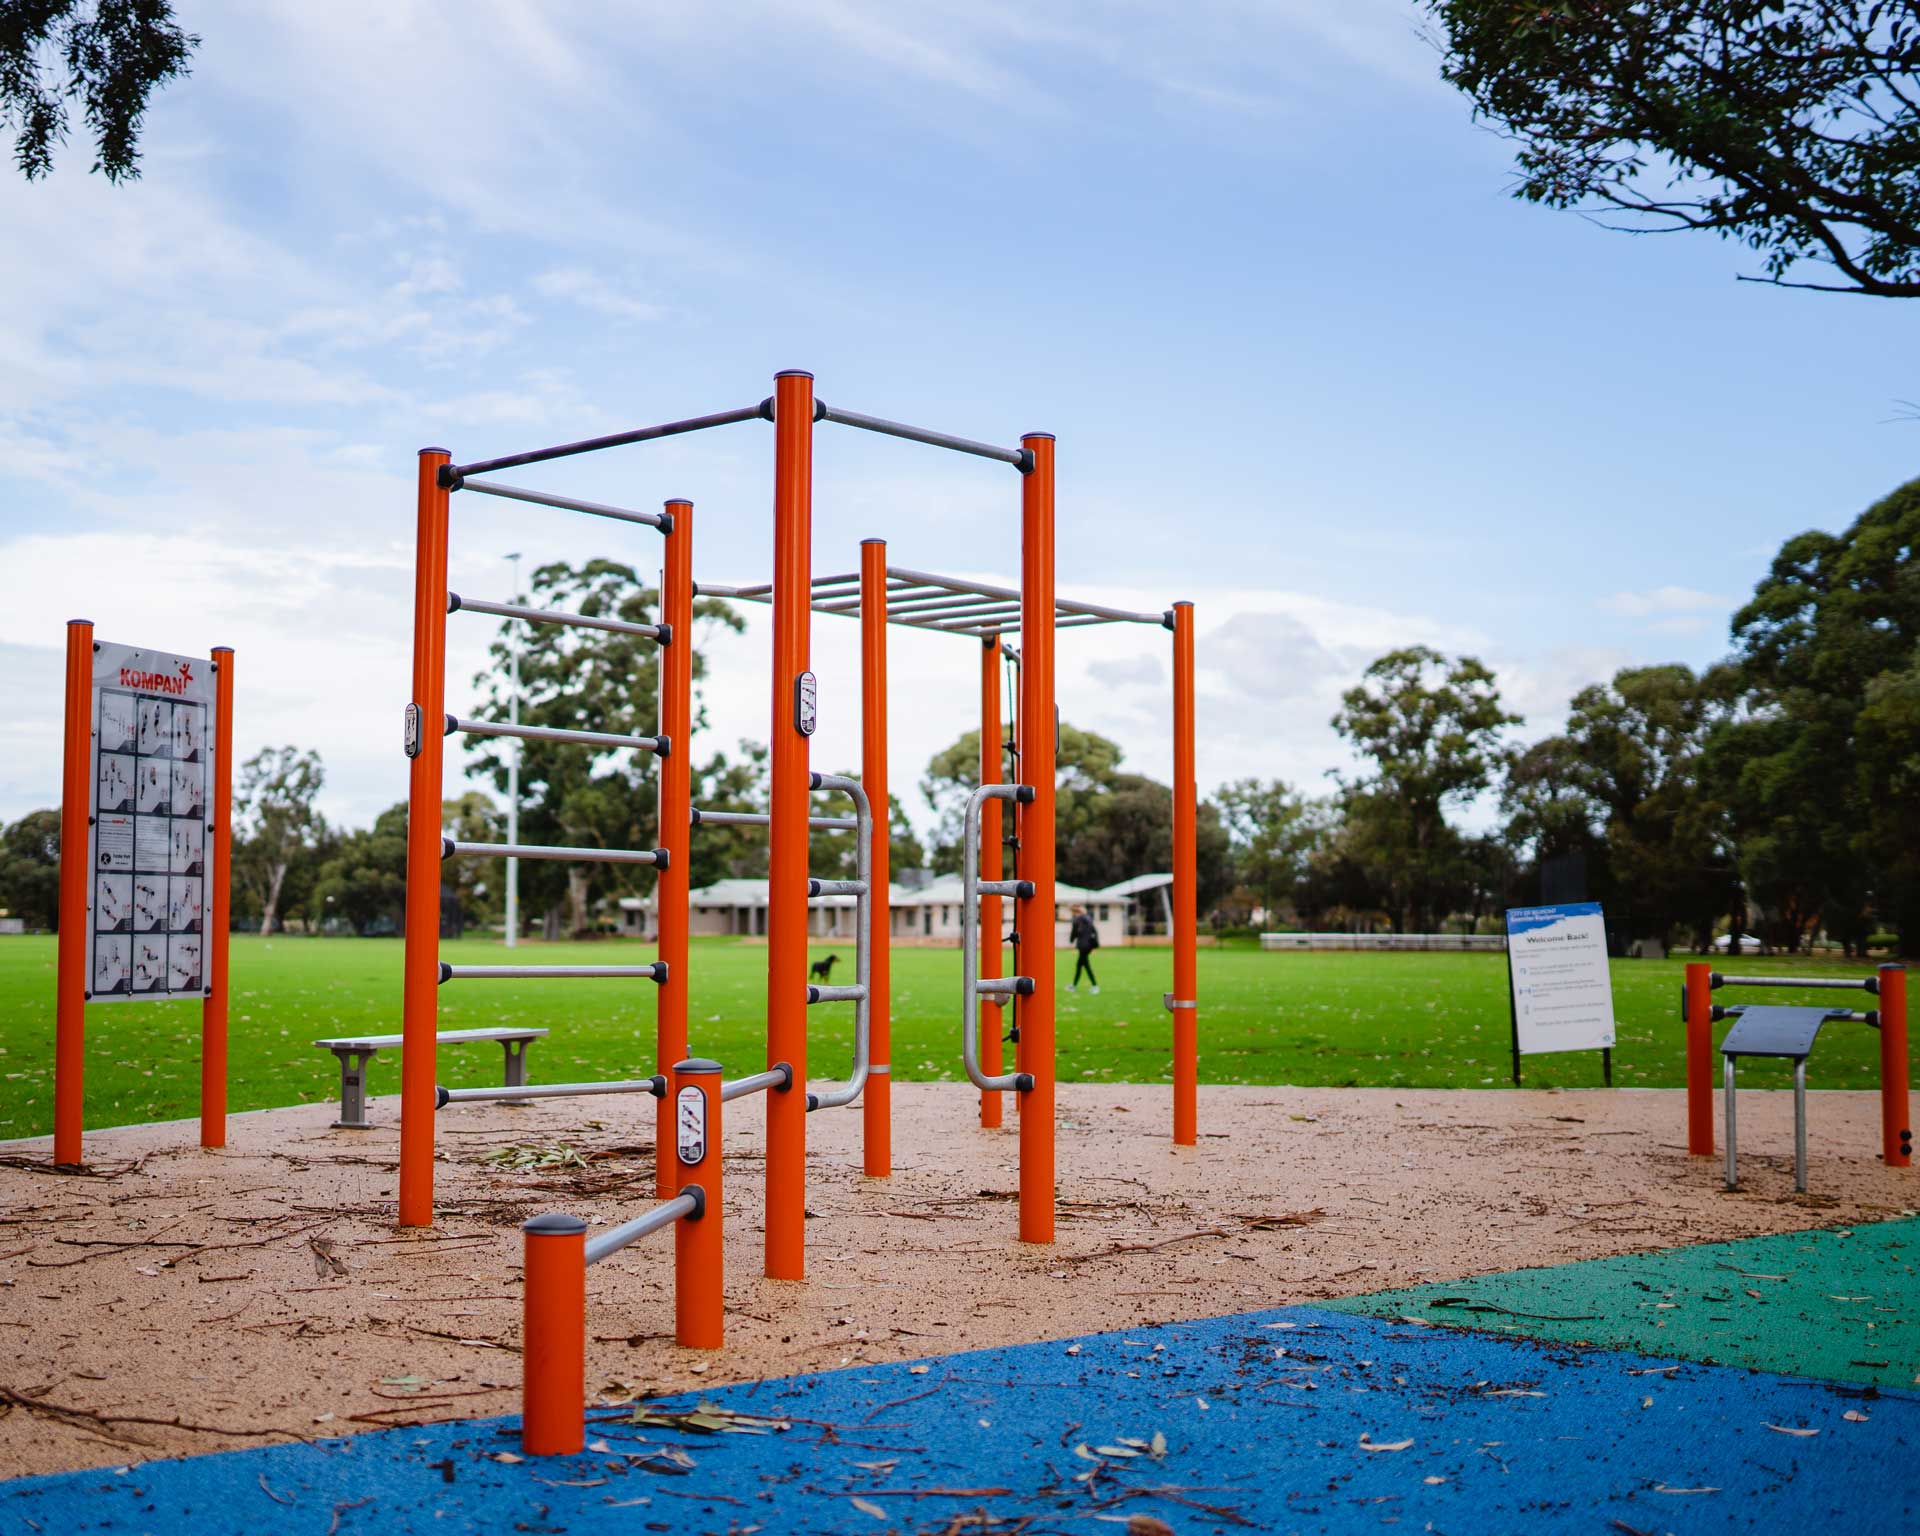 https://www.belmont.wa.gov.au/belmontwebsite/media/media/Discover/What's%20Happening/Staying%20Healthy%20and%20Active/Forster-Park-exercise-equipment.jpg?ext=.jpg